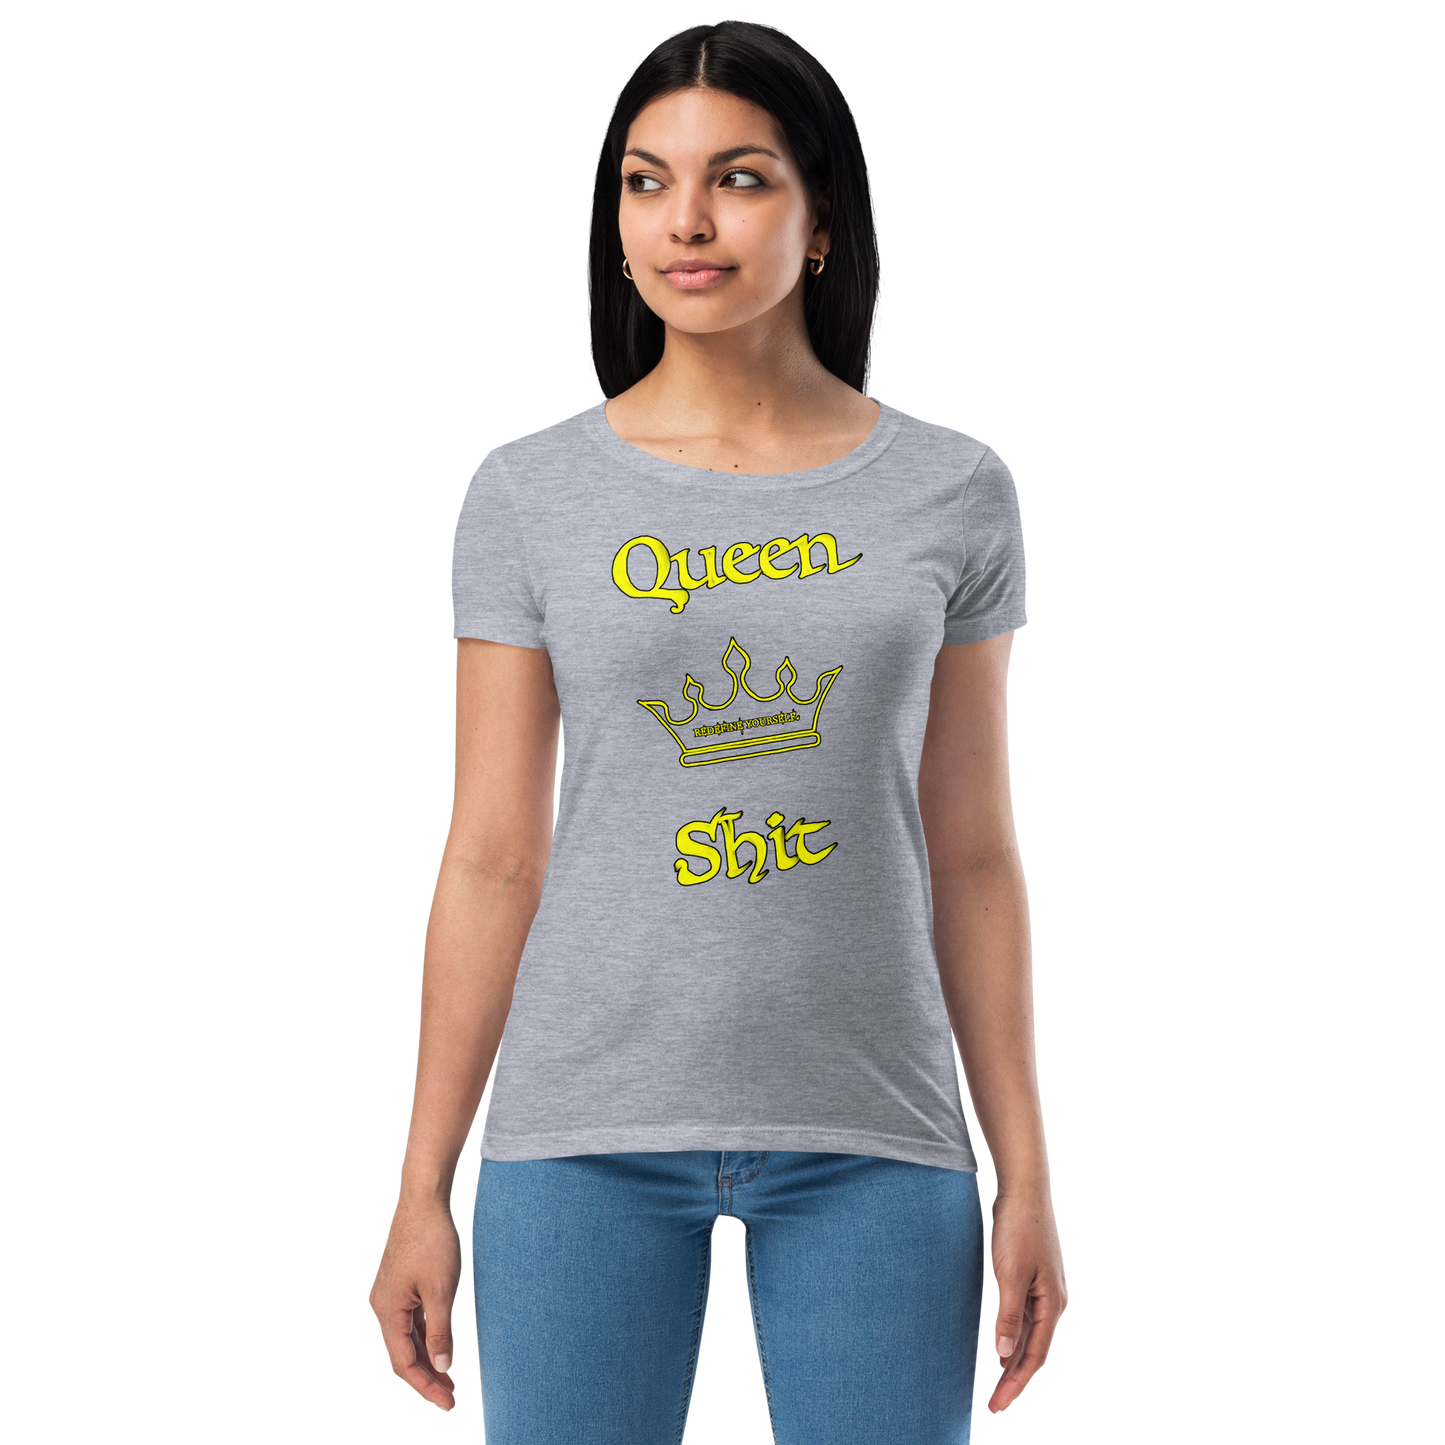 Royal Armor - Queen Shit Women’s fitted t-shirt